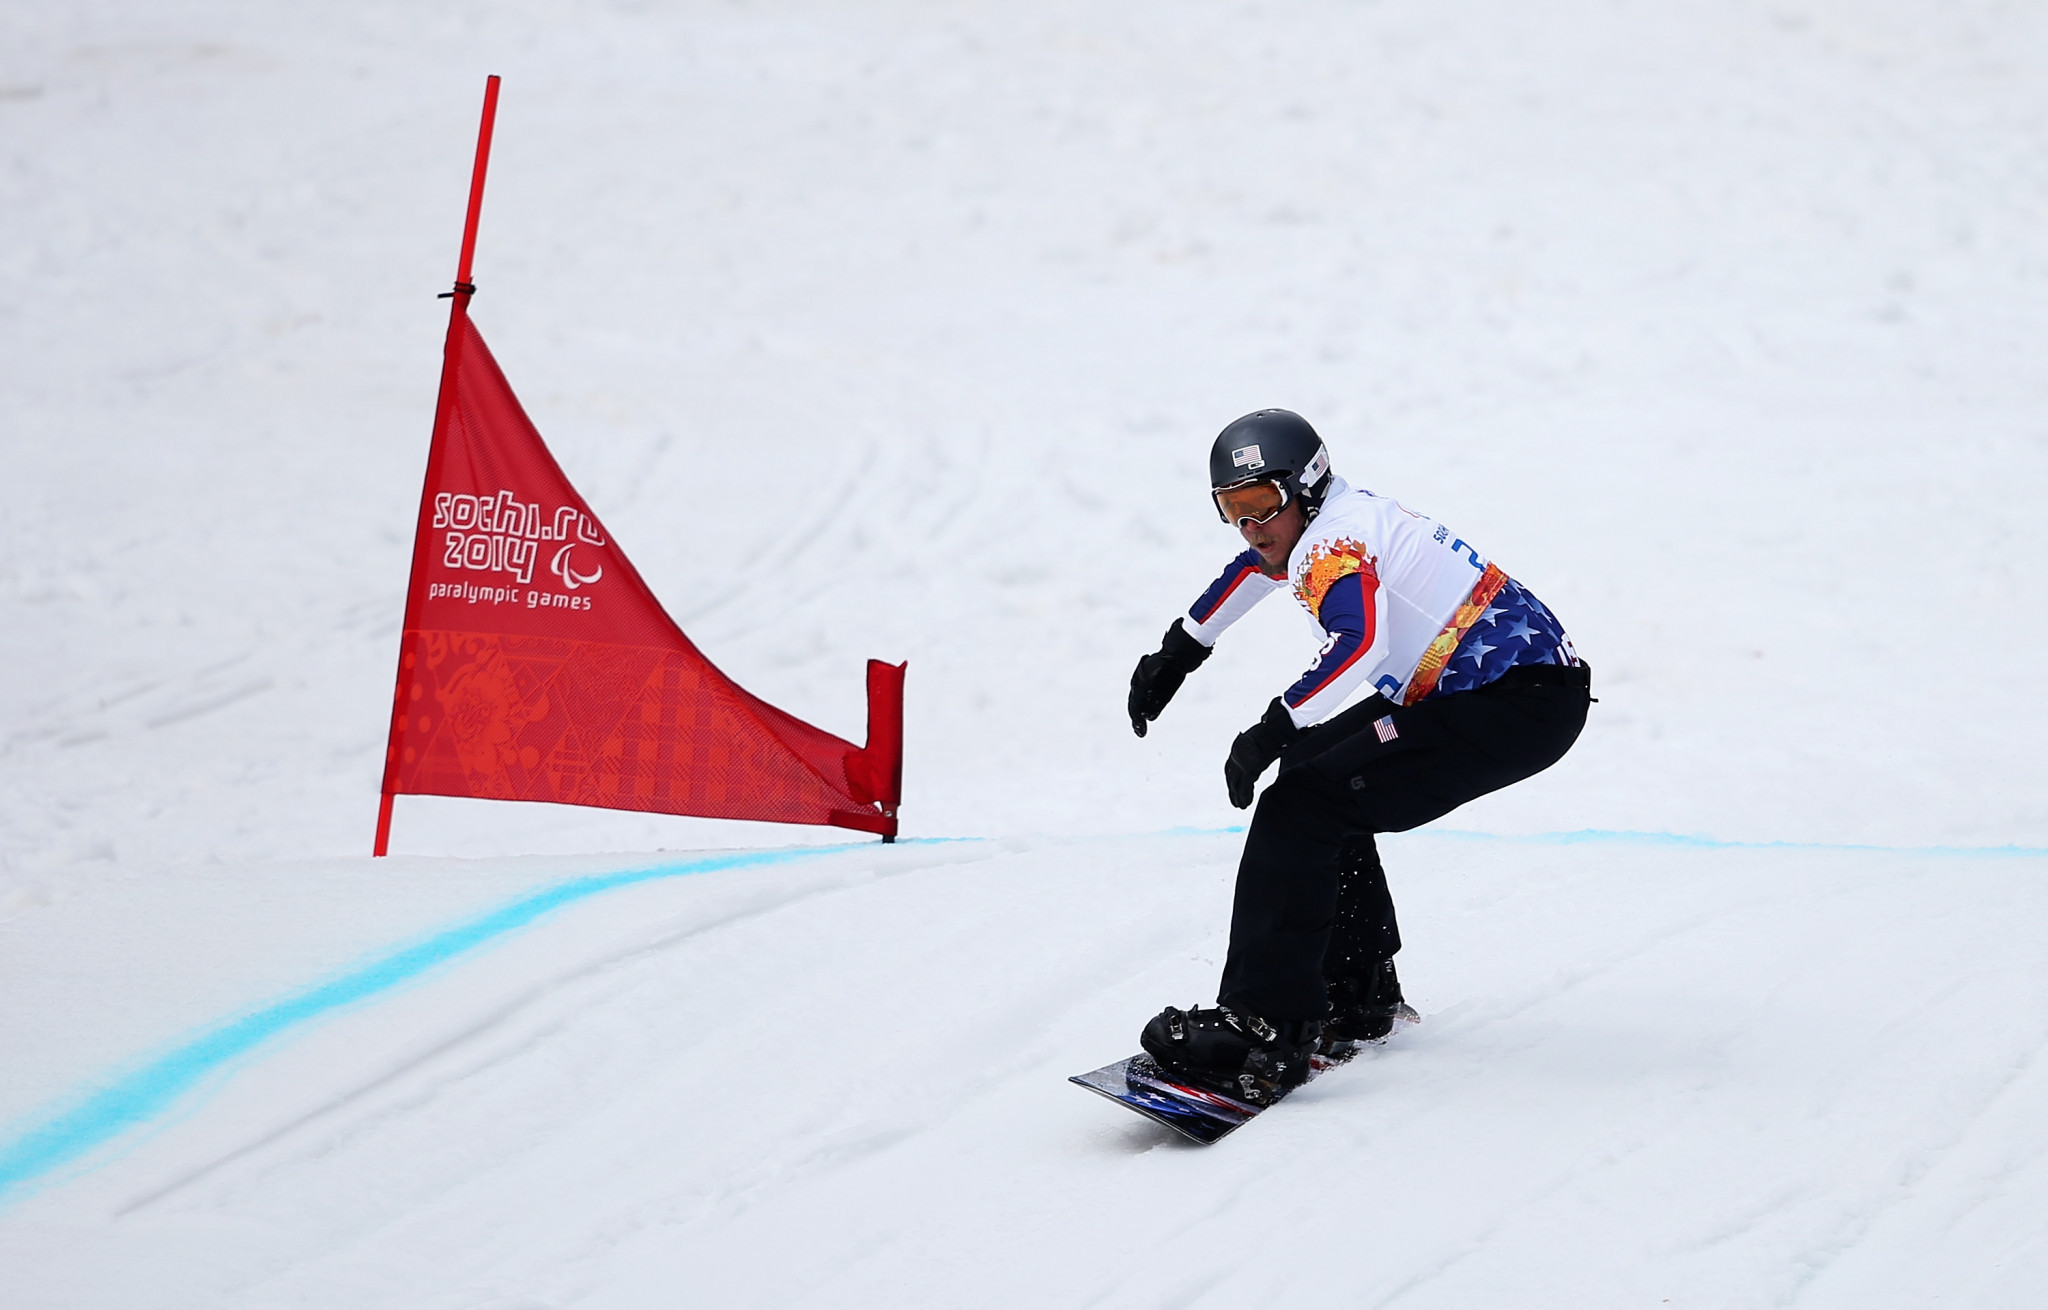 Tyler Burdick made his Paralympic Games debut at Sochi 2014 ©Getty Images